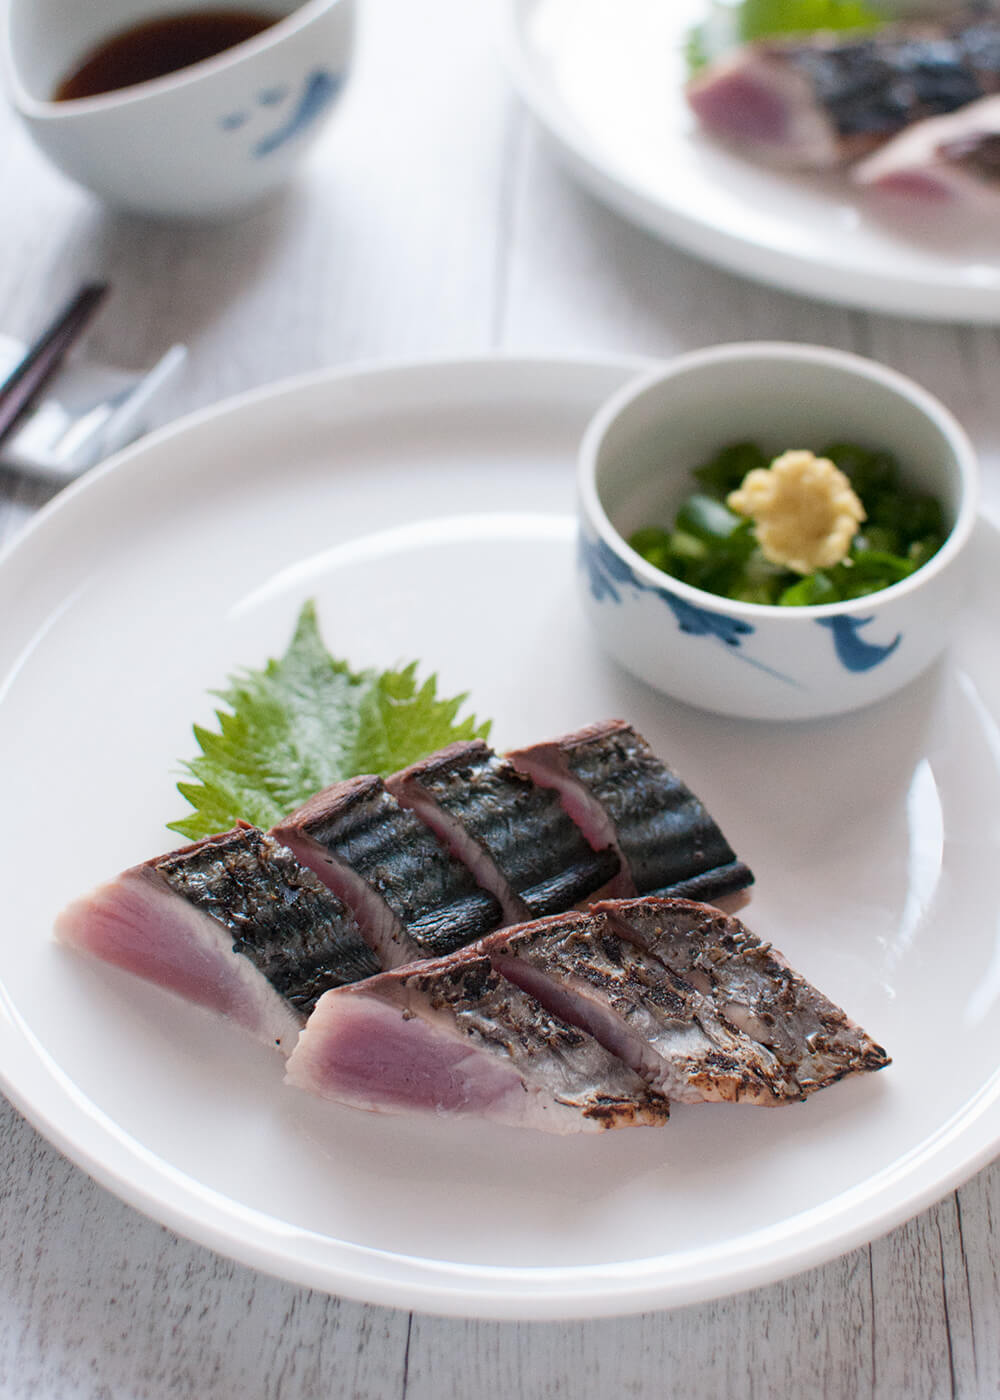 Bonito Tataki (Seared Bonito) is the representative sashimi dish of Kōchi prefecture. When the bonito skin is seared and charred, it gives an appetising aroma to the sashimi. Slice the fillets thicker than usual sashimi slices and eat them with ponzu dressing.